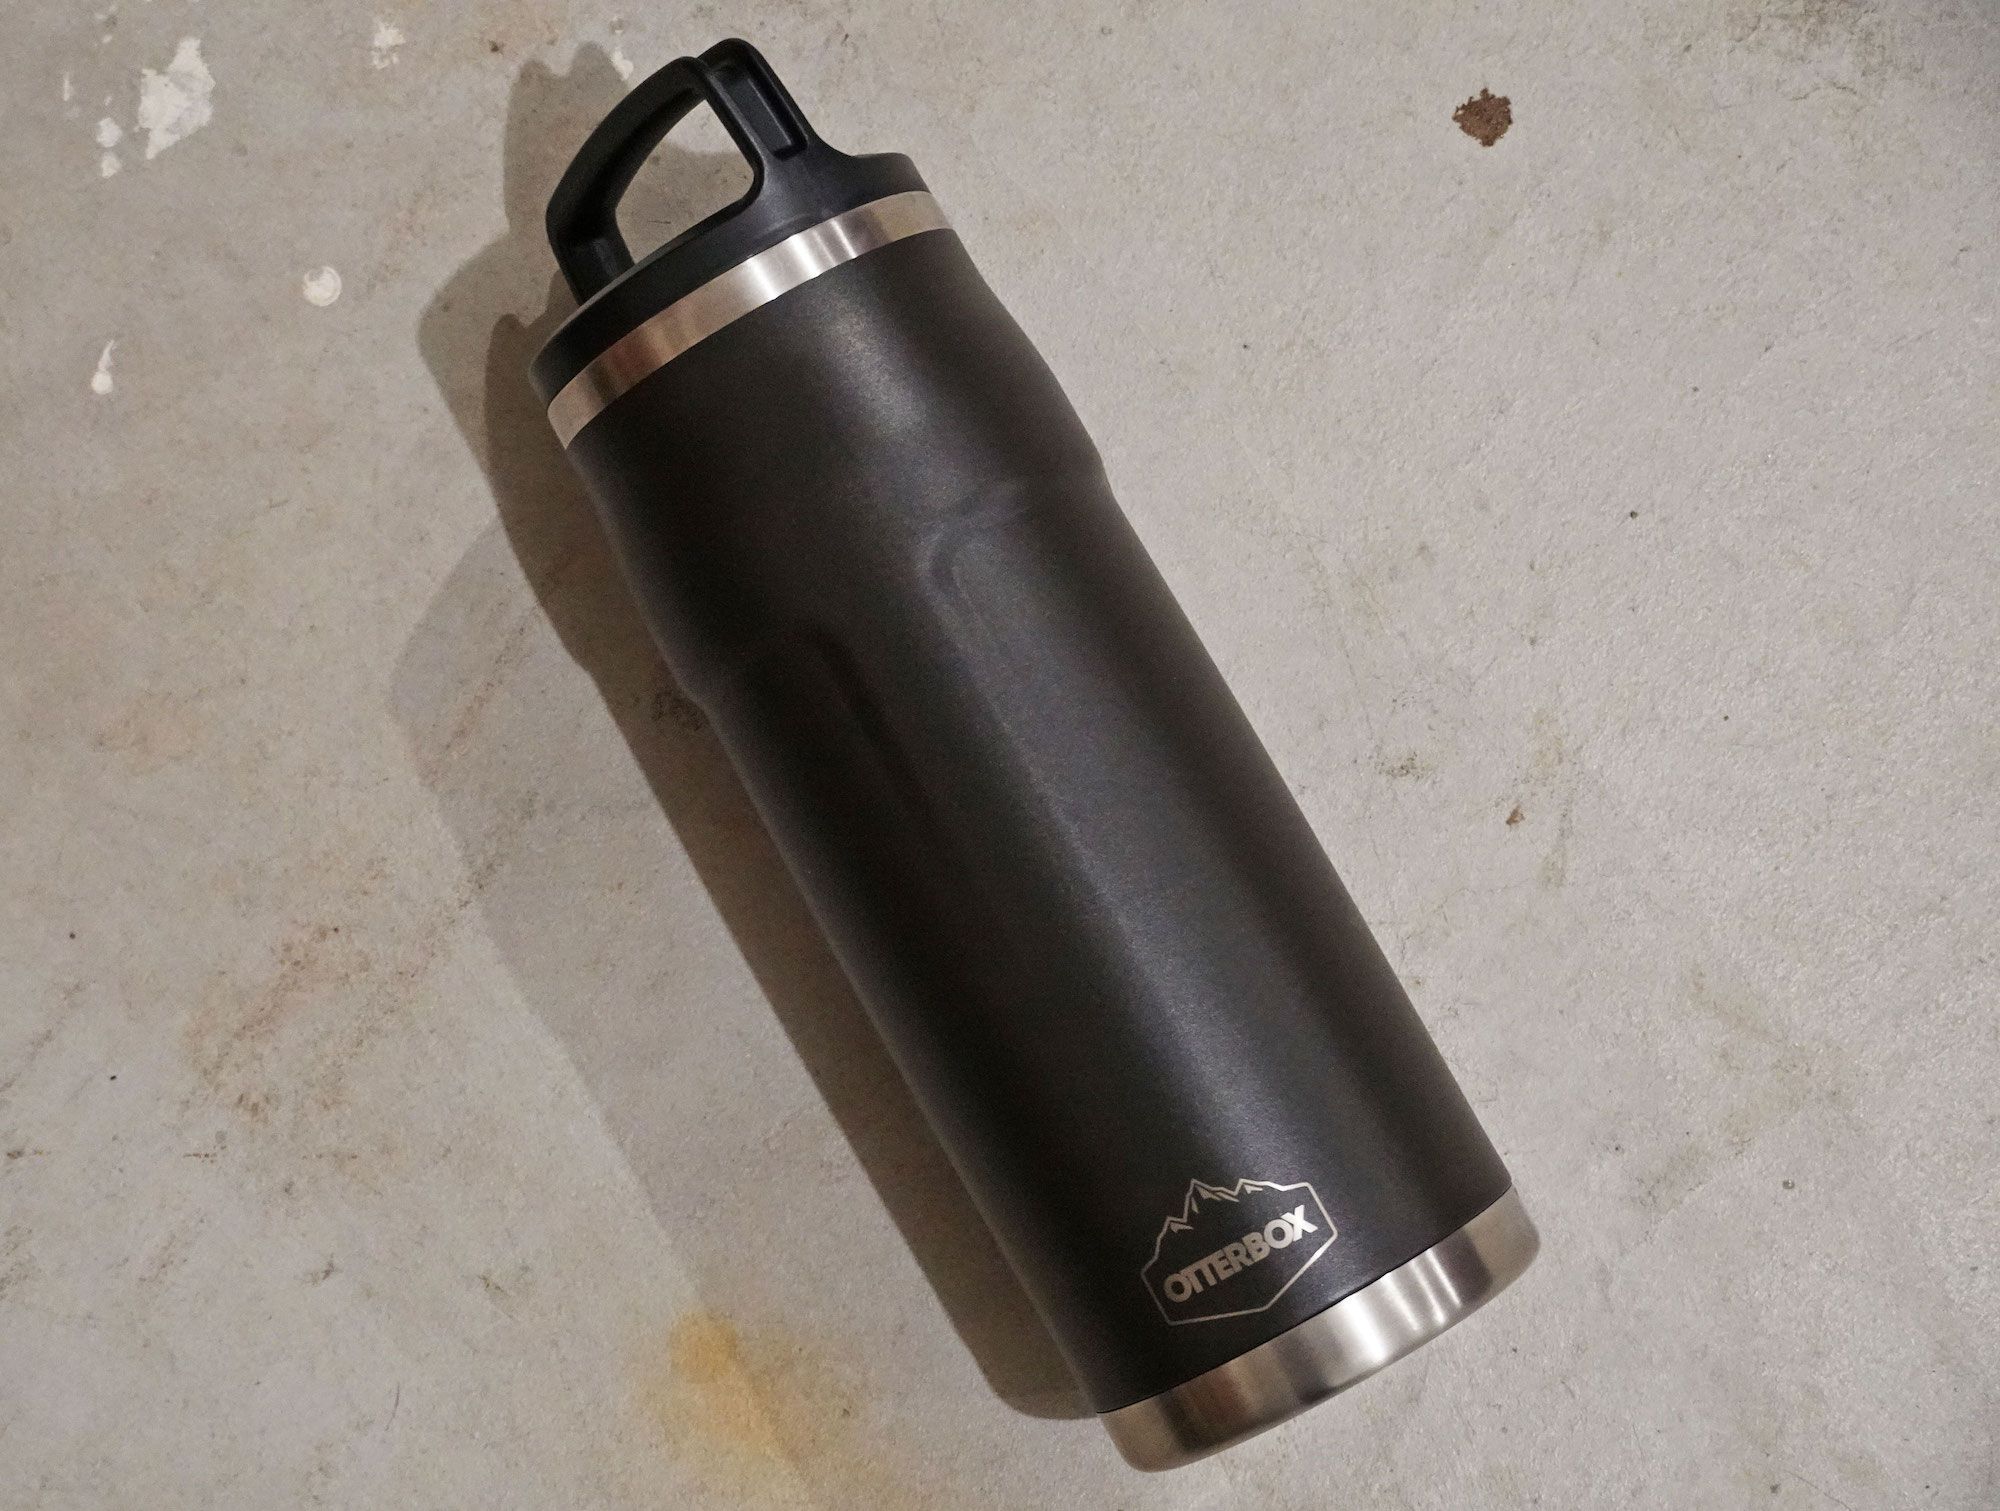 A black Otter Box Elevation Growler thermos